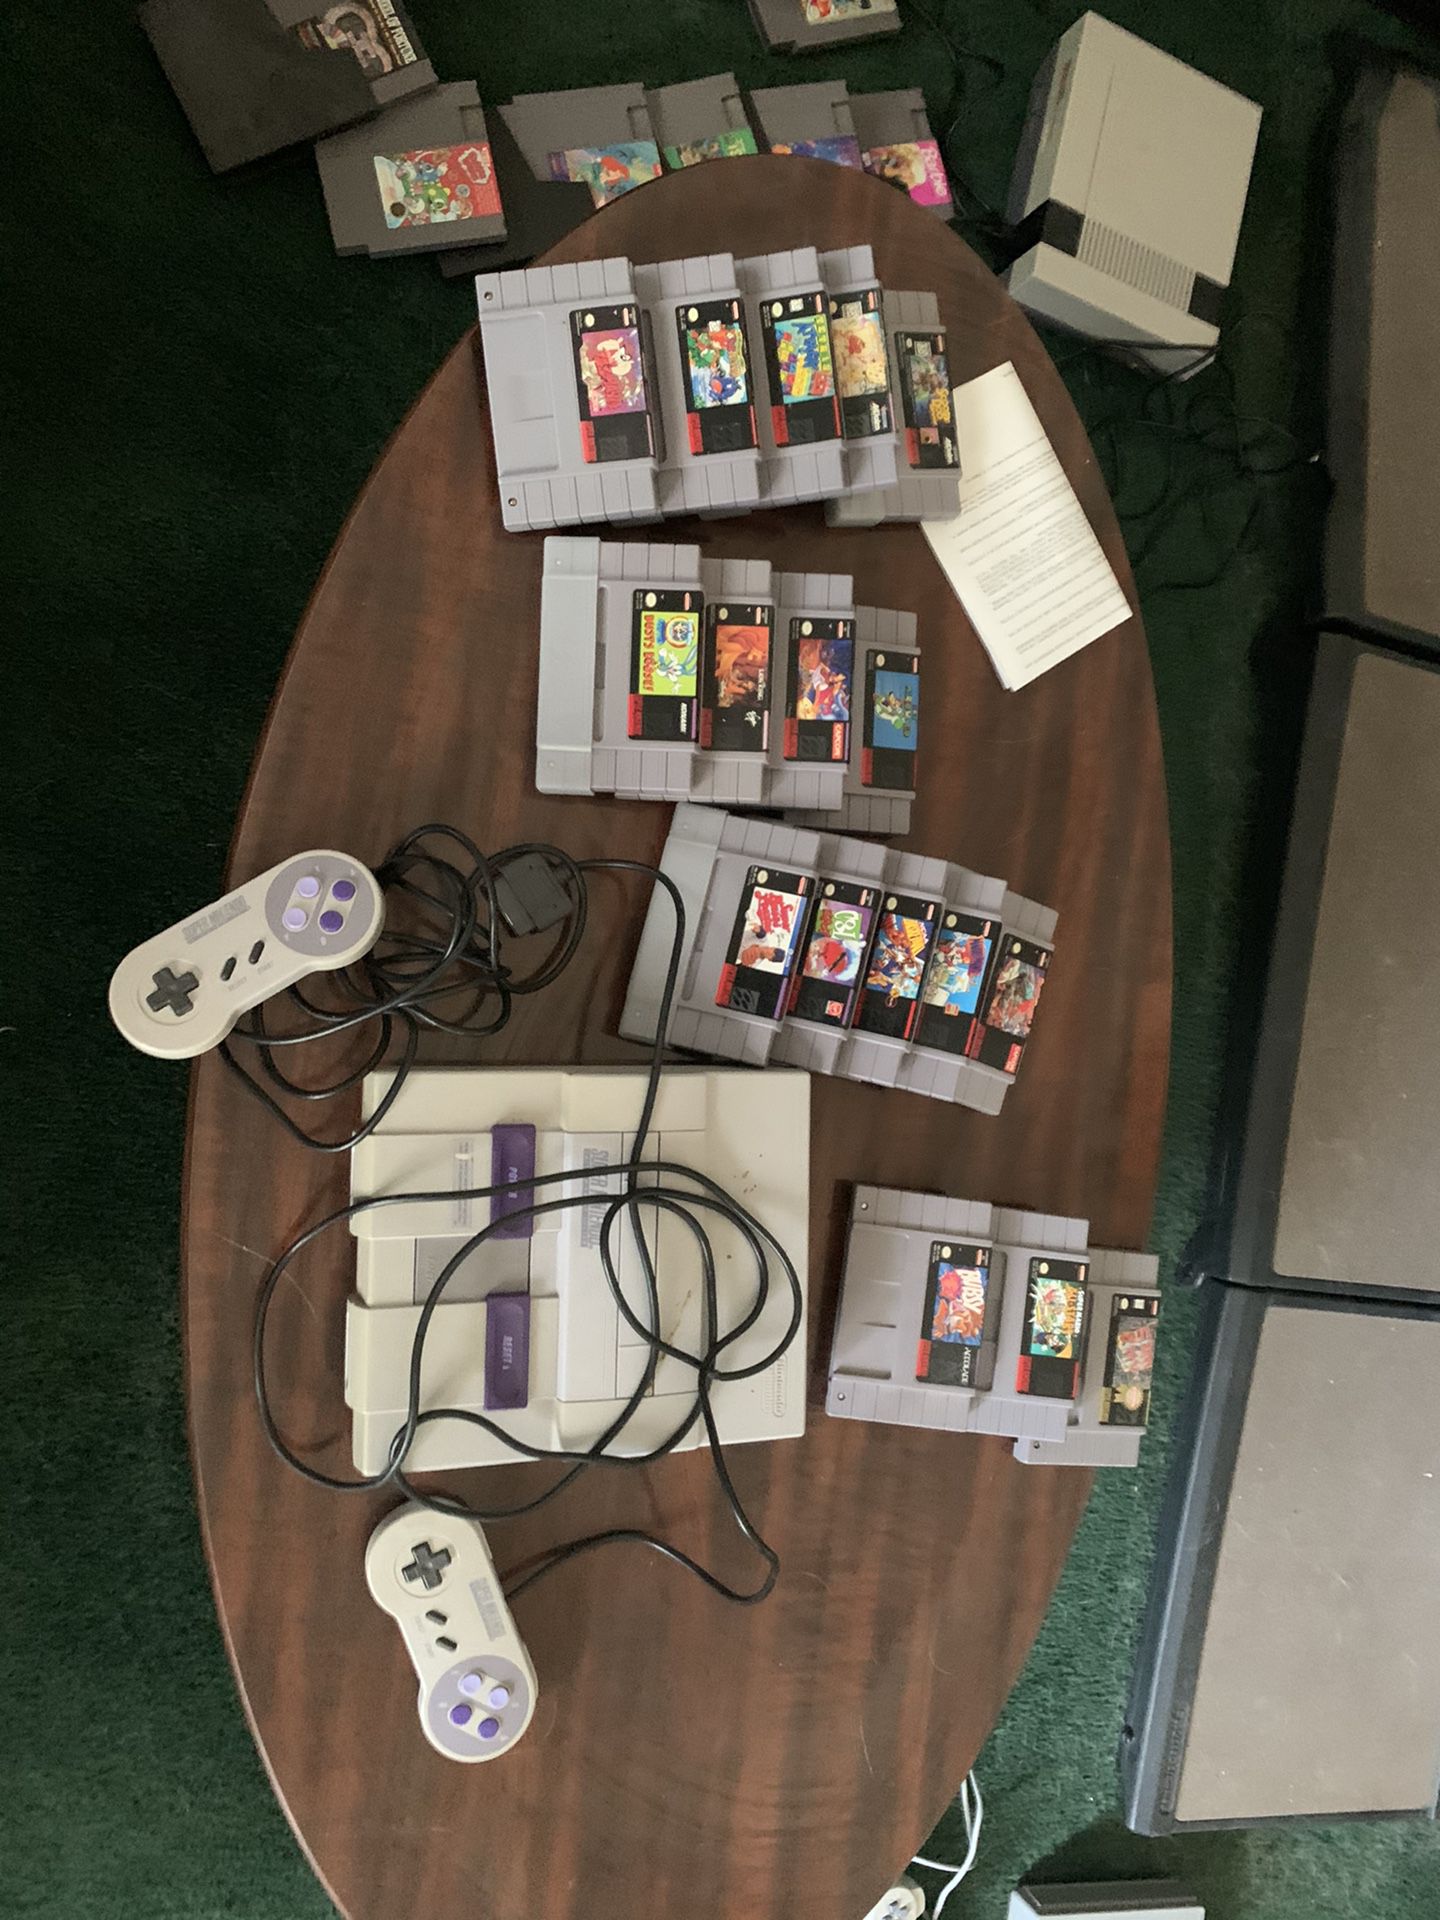 Super Nintendo and about 25 games